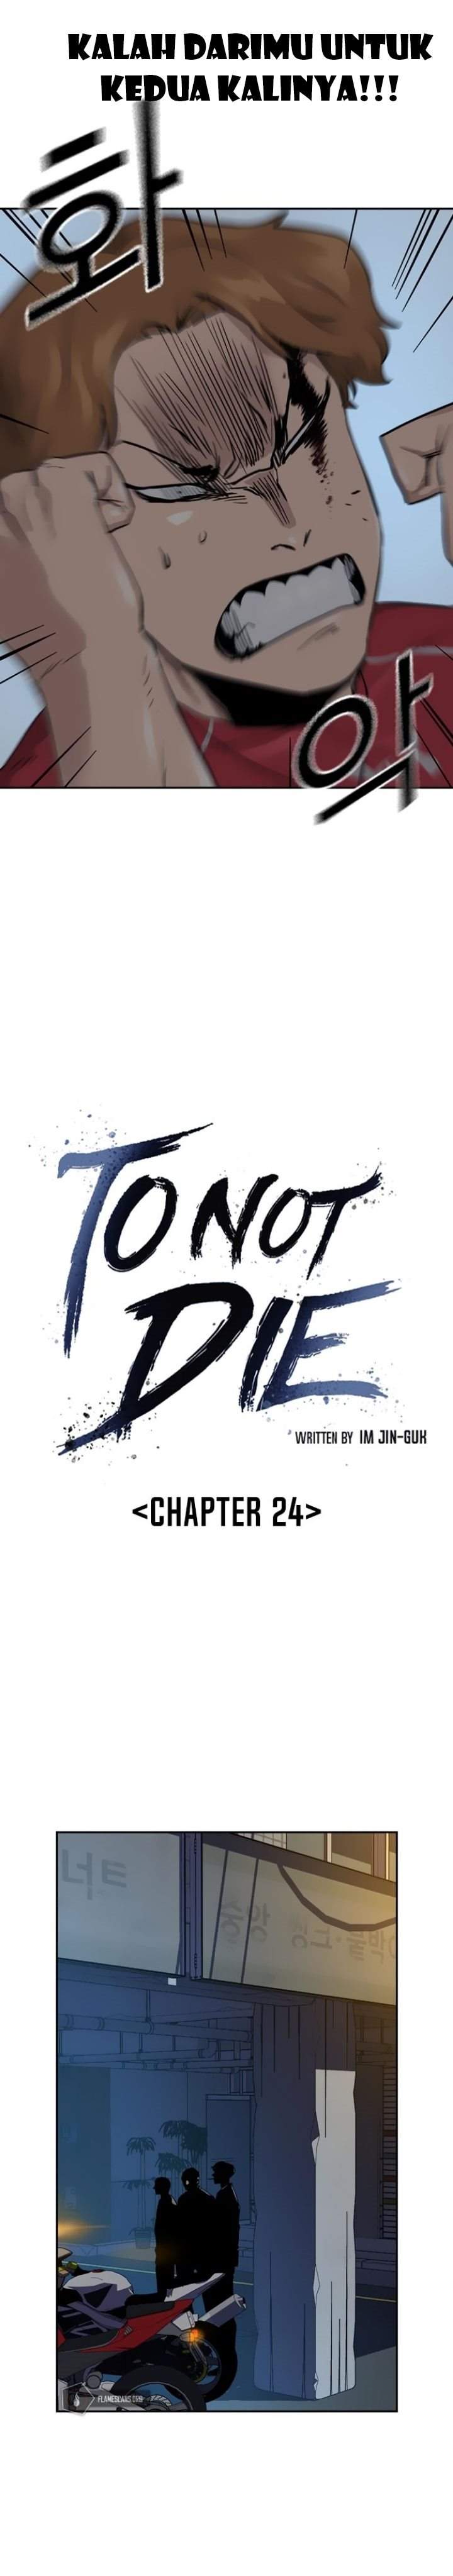 To Not Die Chapter 24